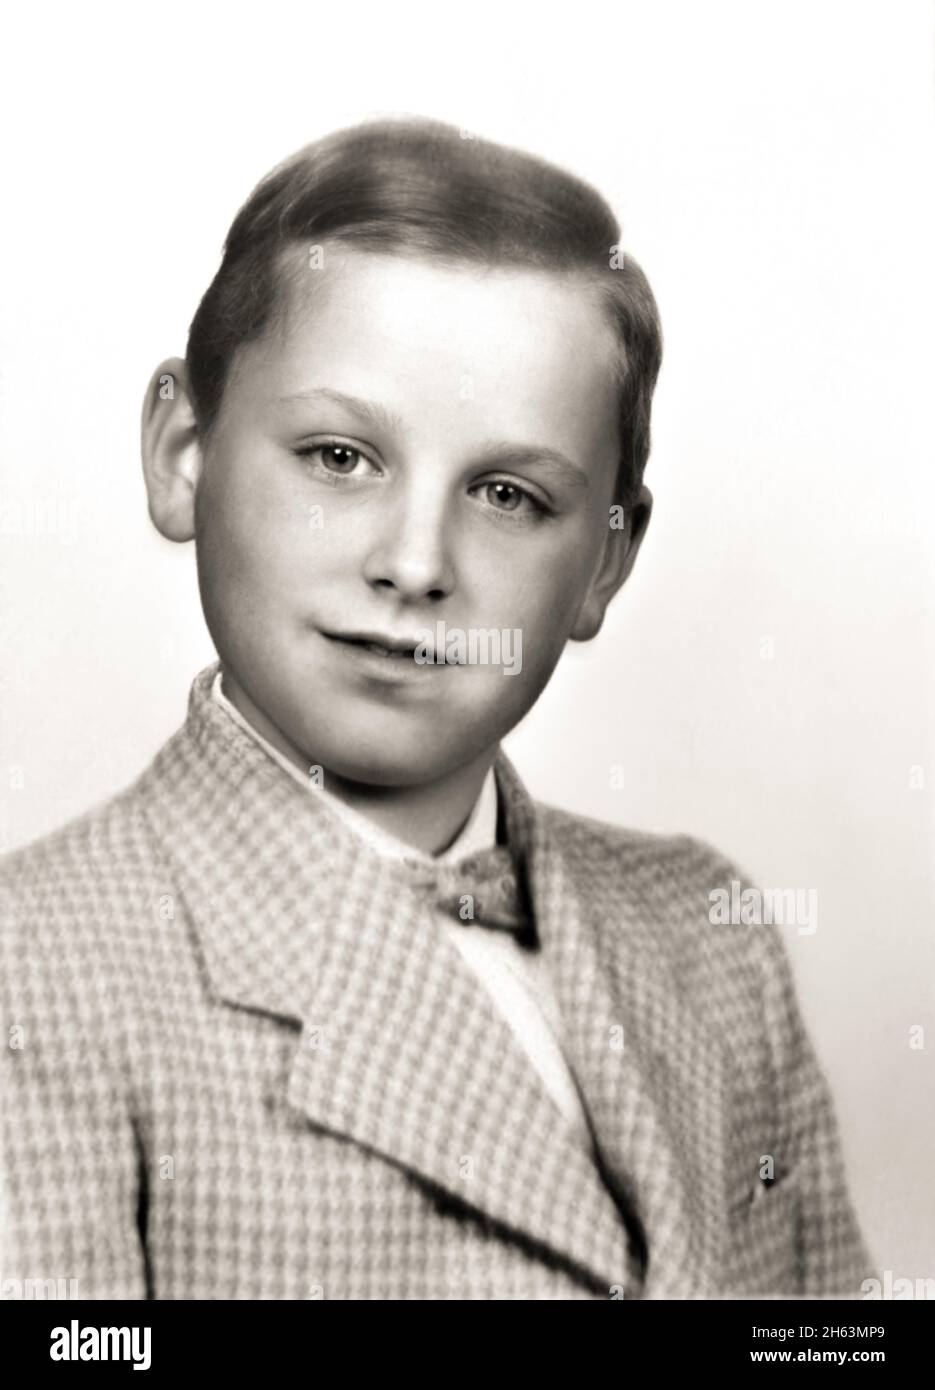 1954 ca, USA : The celebrated american transvestite actor DIVINE ( born Harris Glenn Milstead , 1945 - 1988 ) when was a young boy aged 9 . Unknown photographer .- HISTORY - FOTO STORICHE - LGBT - LGBTQ - GAY - Homosexuality - Homosexual - Omosessualità - Omosessuale - TRAVESTITO - TRANSGENDER - FEMALE IMPERSONATOR - ATTORE - MOVIE - CINEMA - personalità da bambino bambini da giovane - personality personalities when was young - INFANZIA - CHILD - CHILDREN - CHILDHOOD - smile sorriso ---- ARCHIVIO GBB Stock Photo